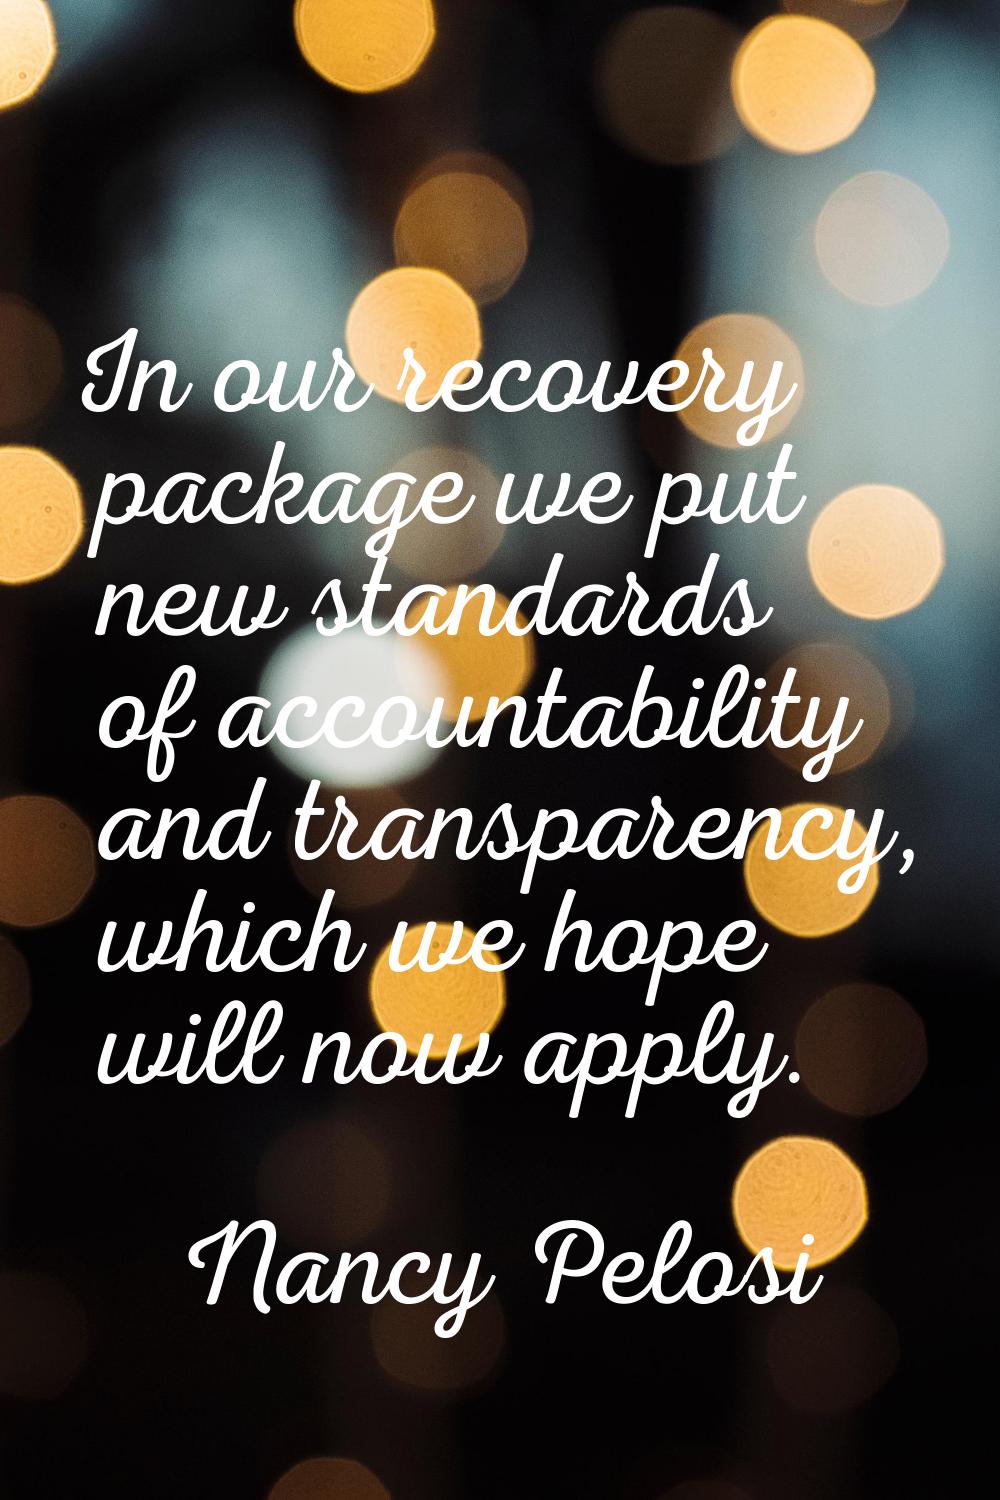 In our recovery package we put new standards of accountability and transparency, which we hope will